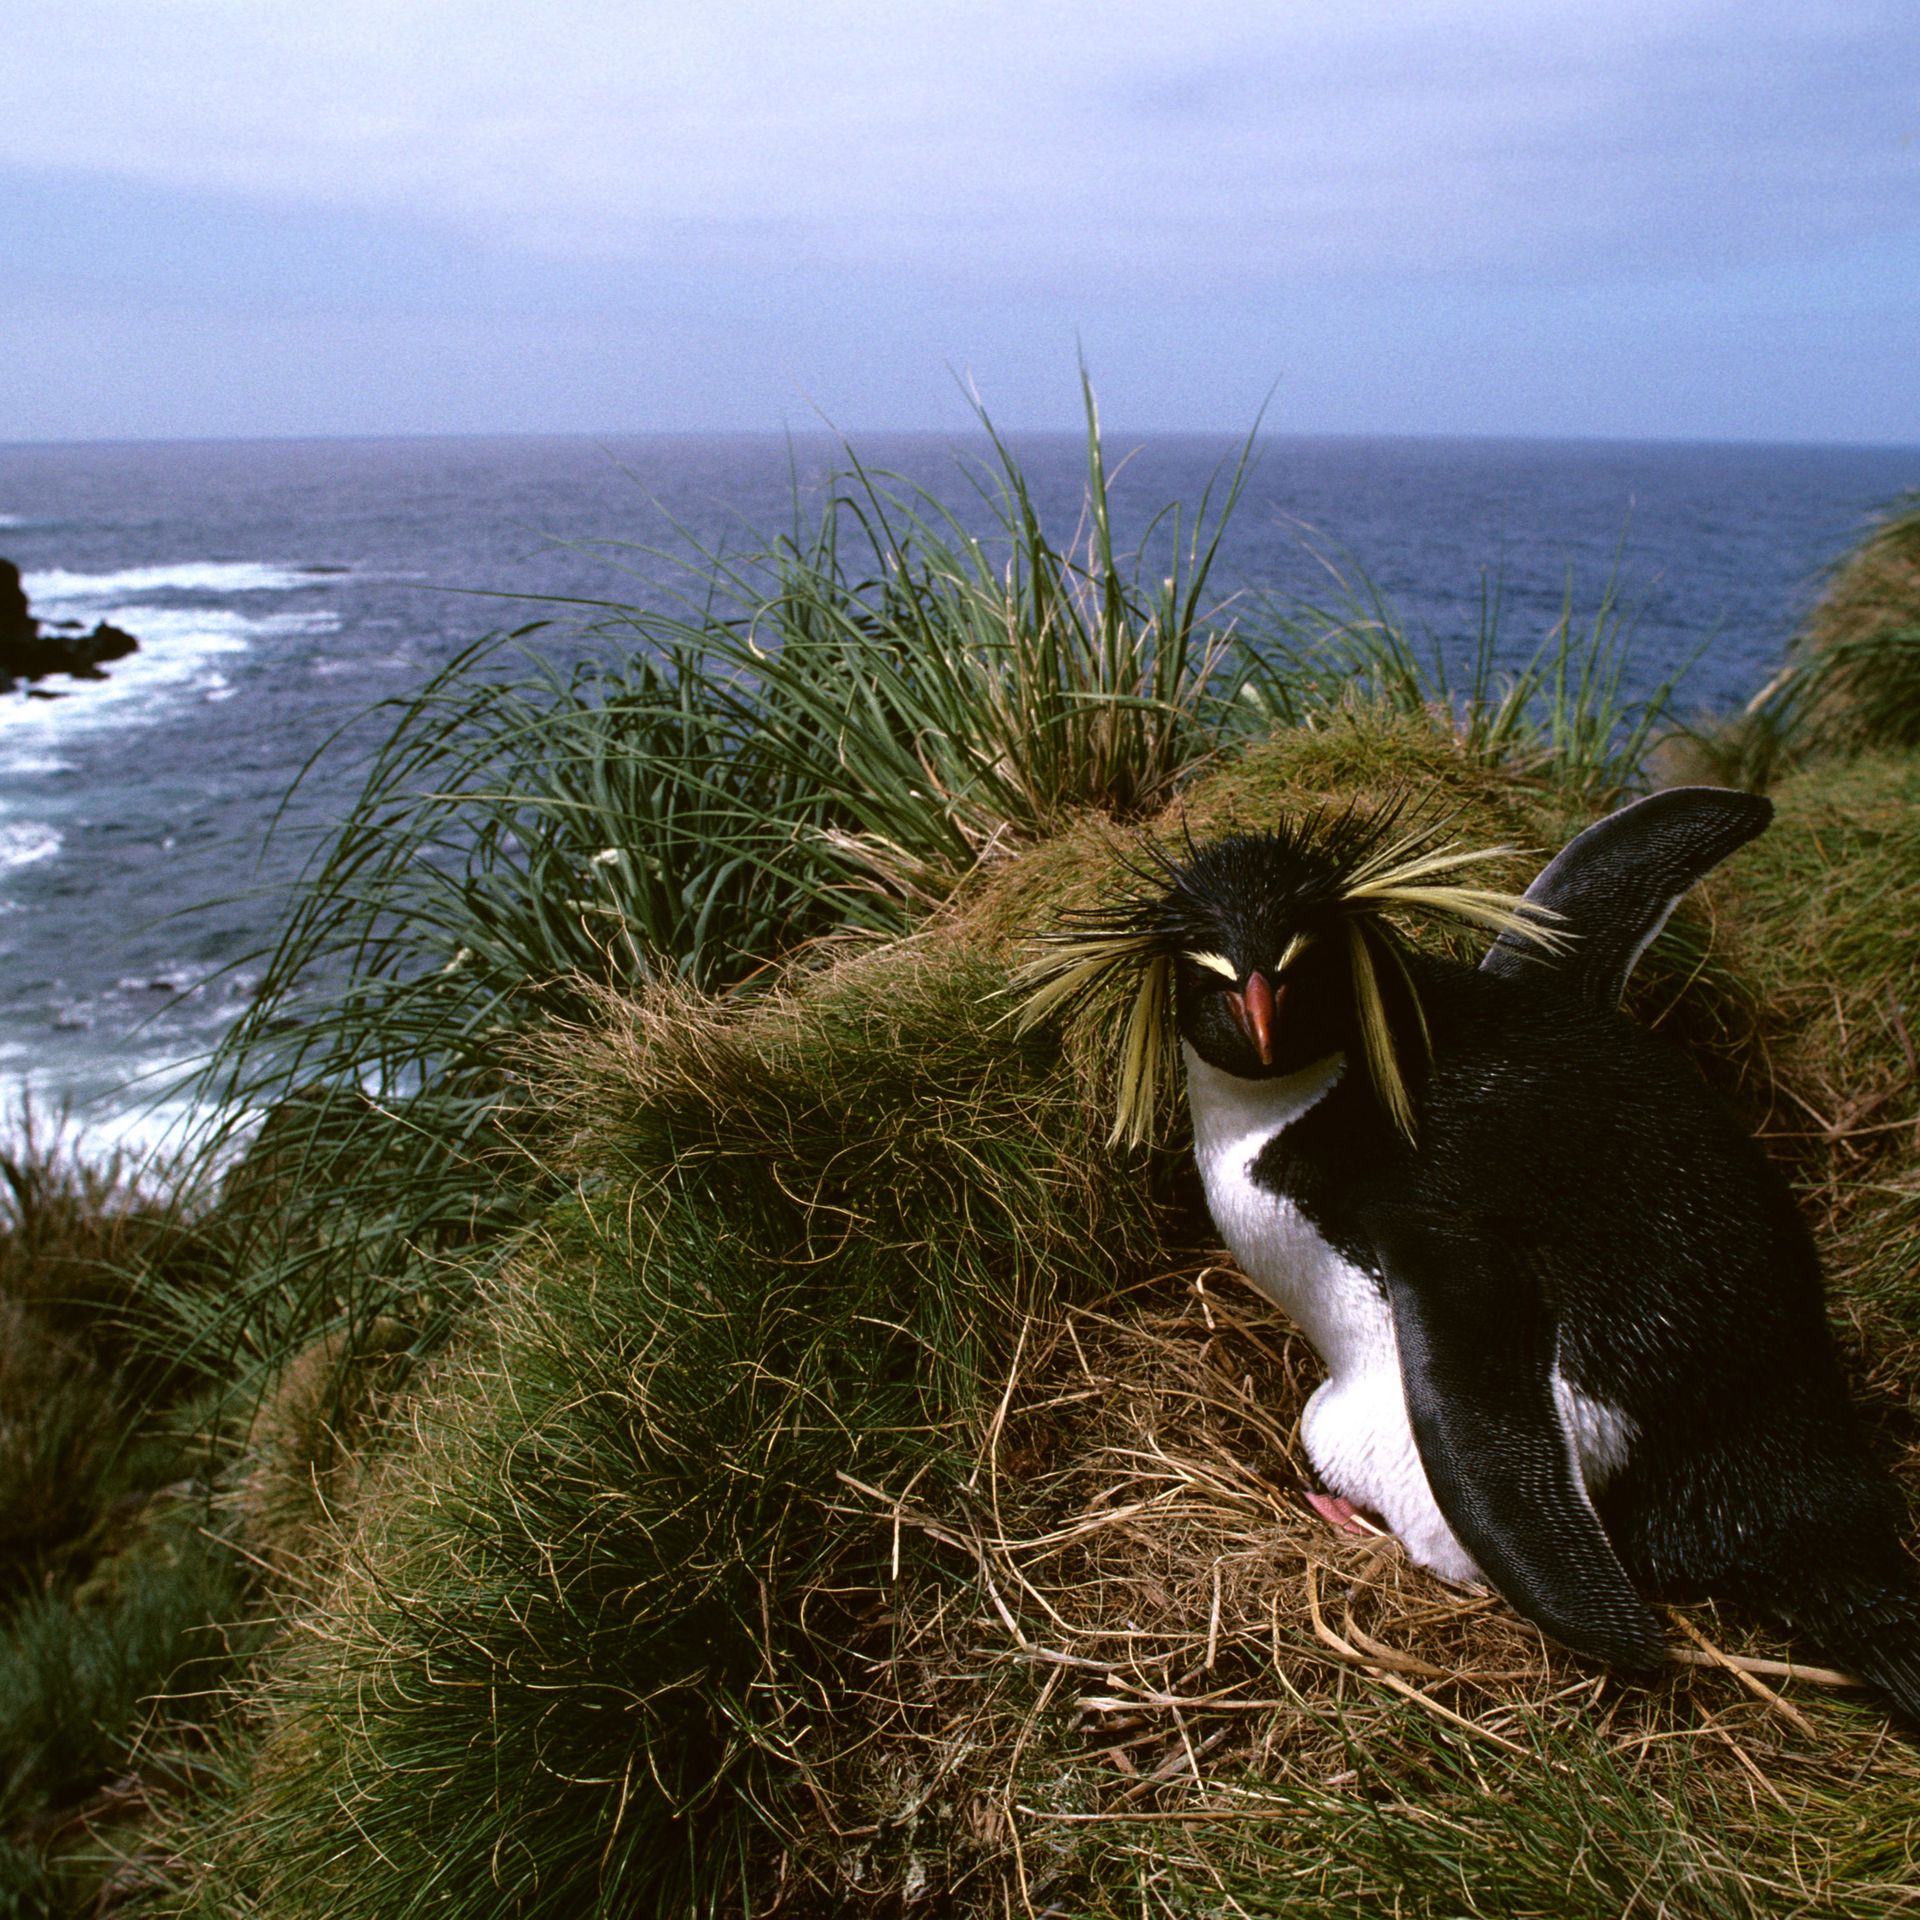 Penguins on Gough Island in the South Atlantic